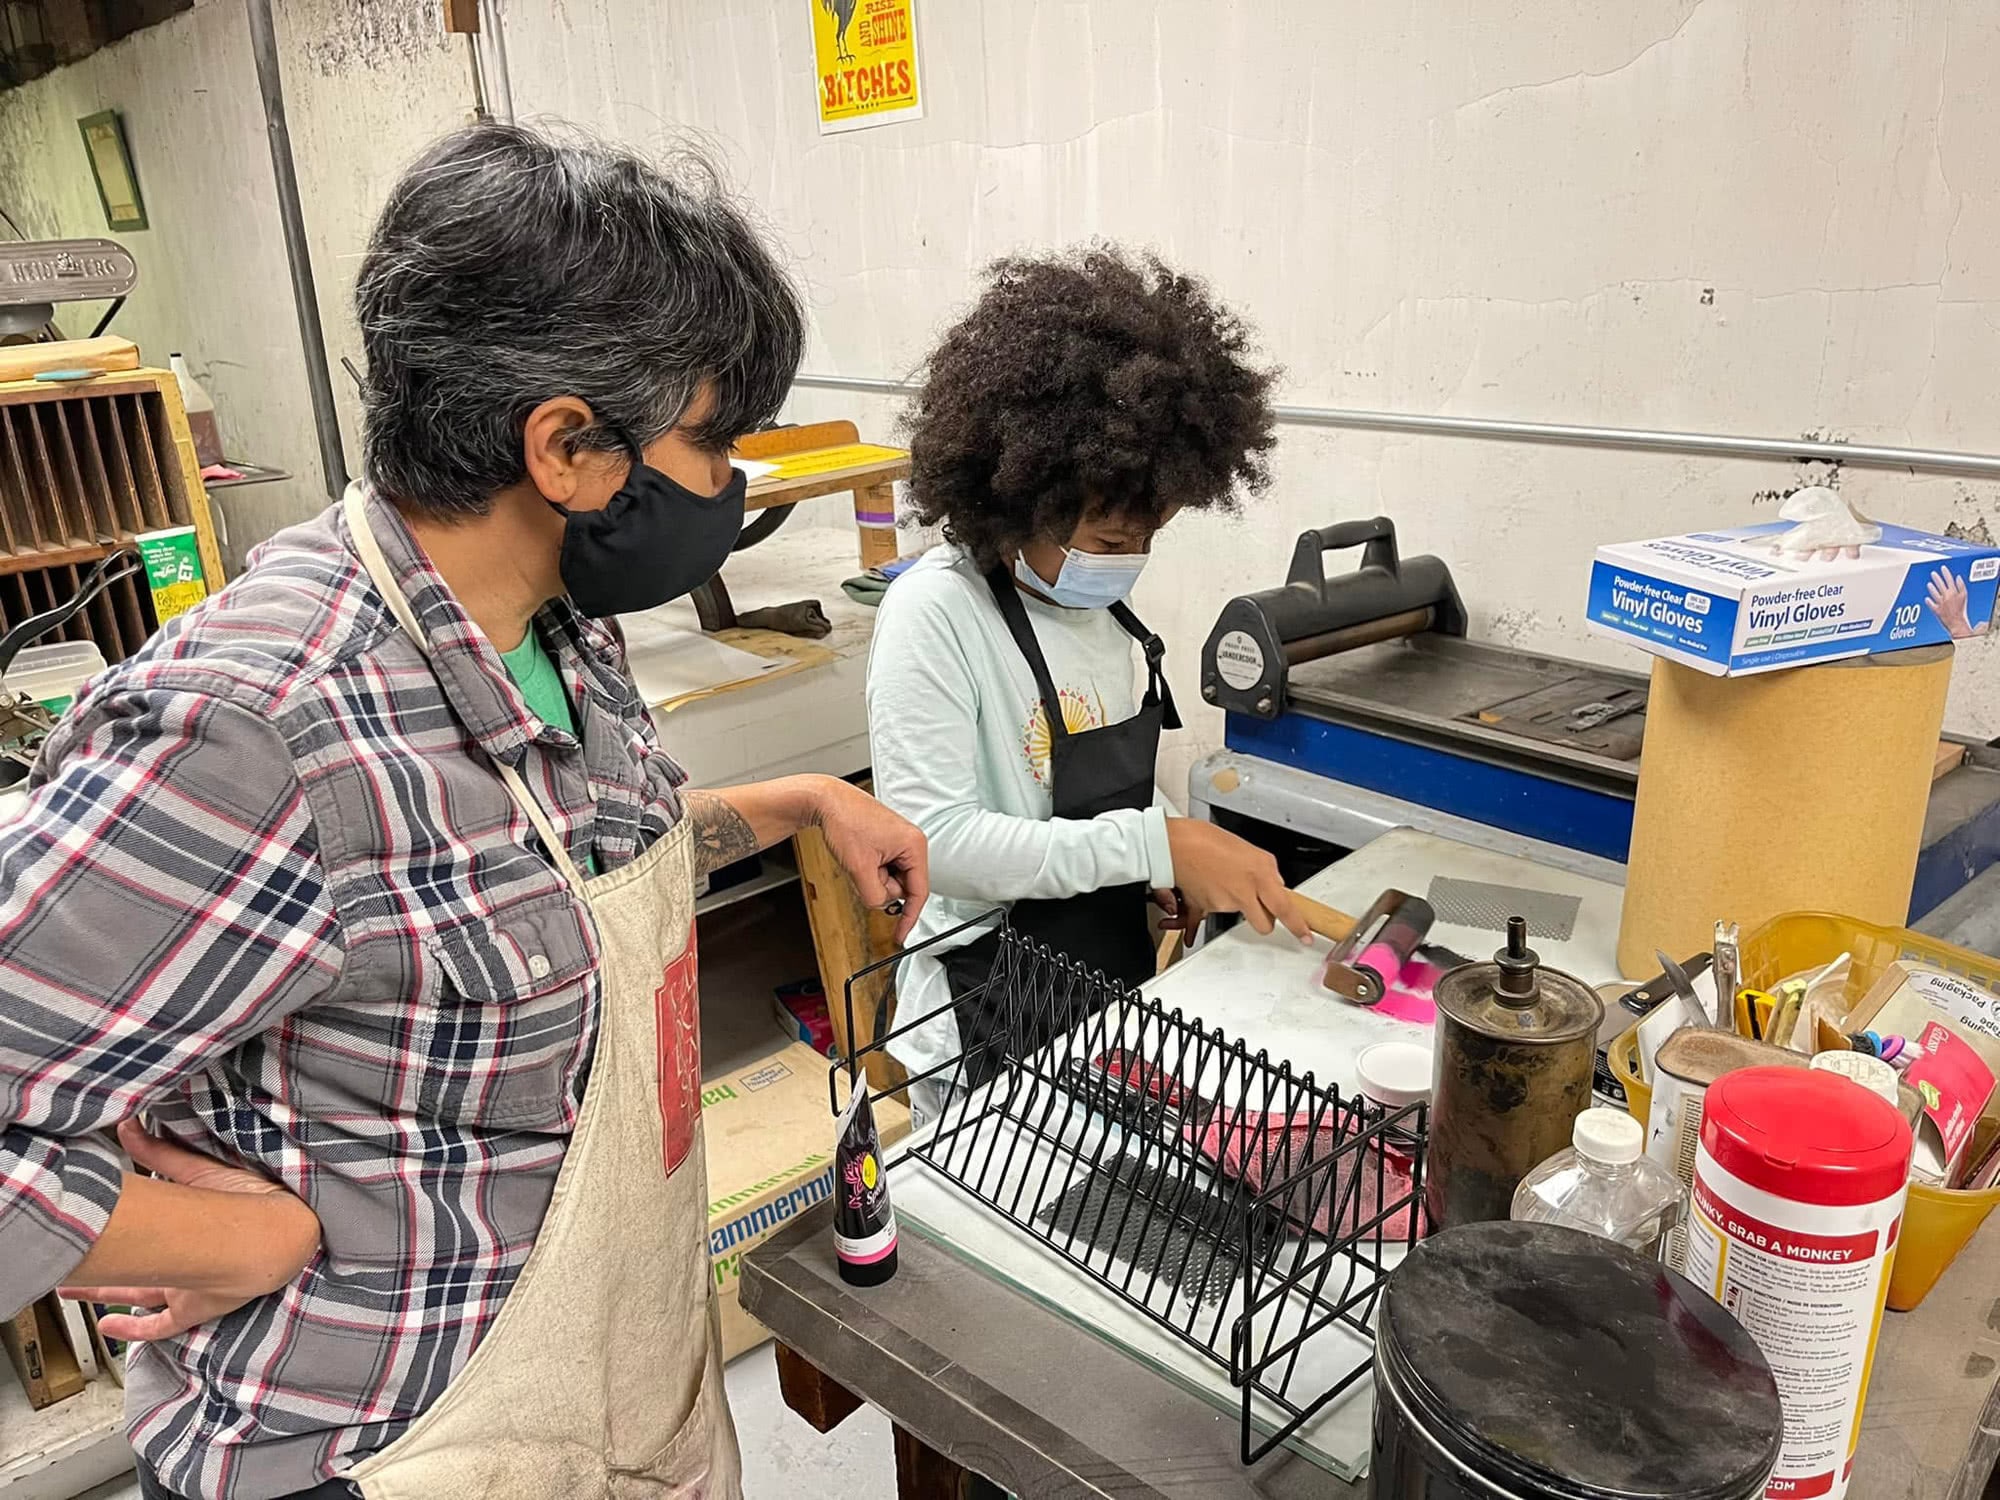 Black Artist Collective: Two people are gathered around a table in a letterpress studio, wearing aprons. One student is rolling out paint on the table to prepare for a print, and the other person is watching over them.